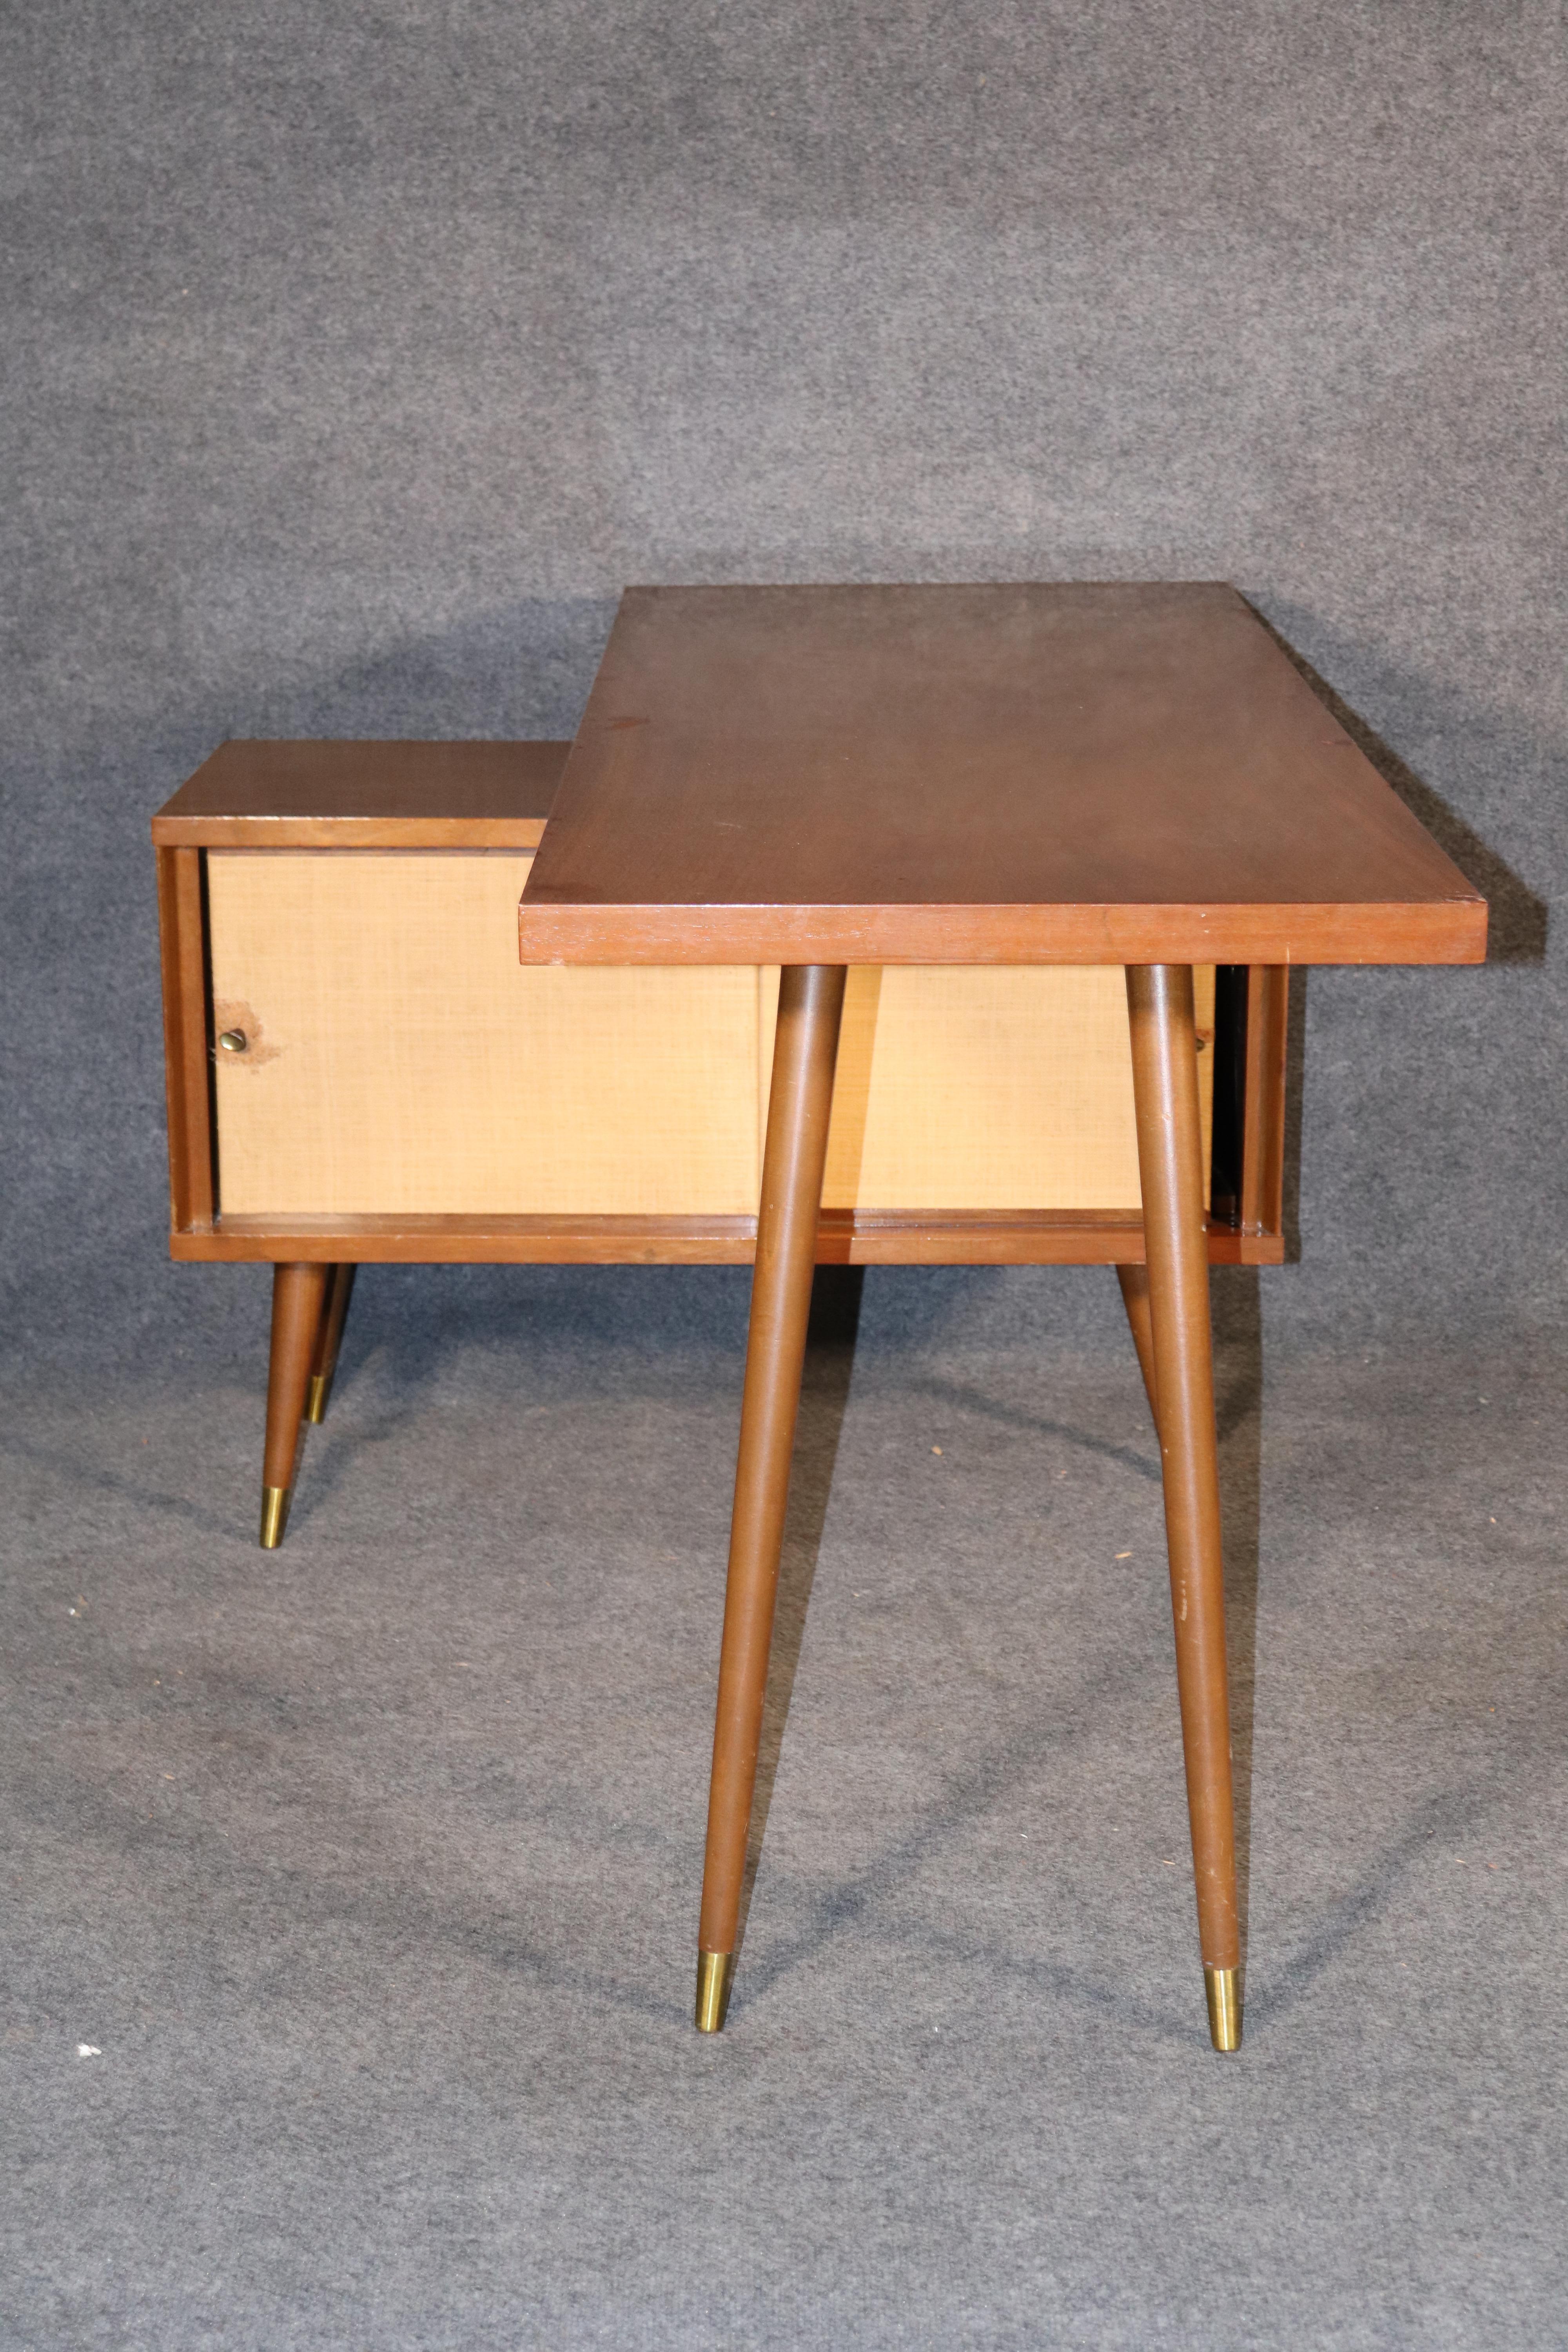 Unusual office desk with storage cabinet space. Paul McCobb style maple wood, cone legs and grass cloth cabinet.
Please confirm location.